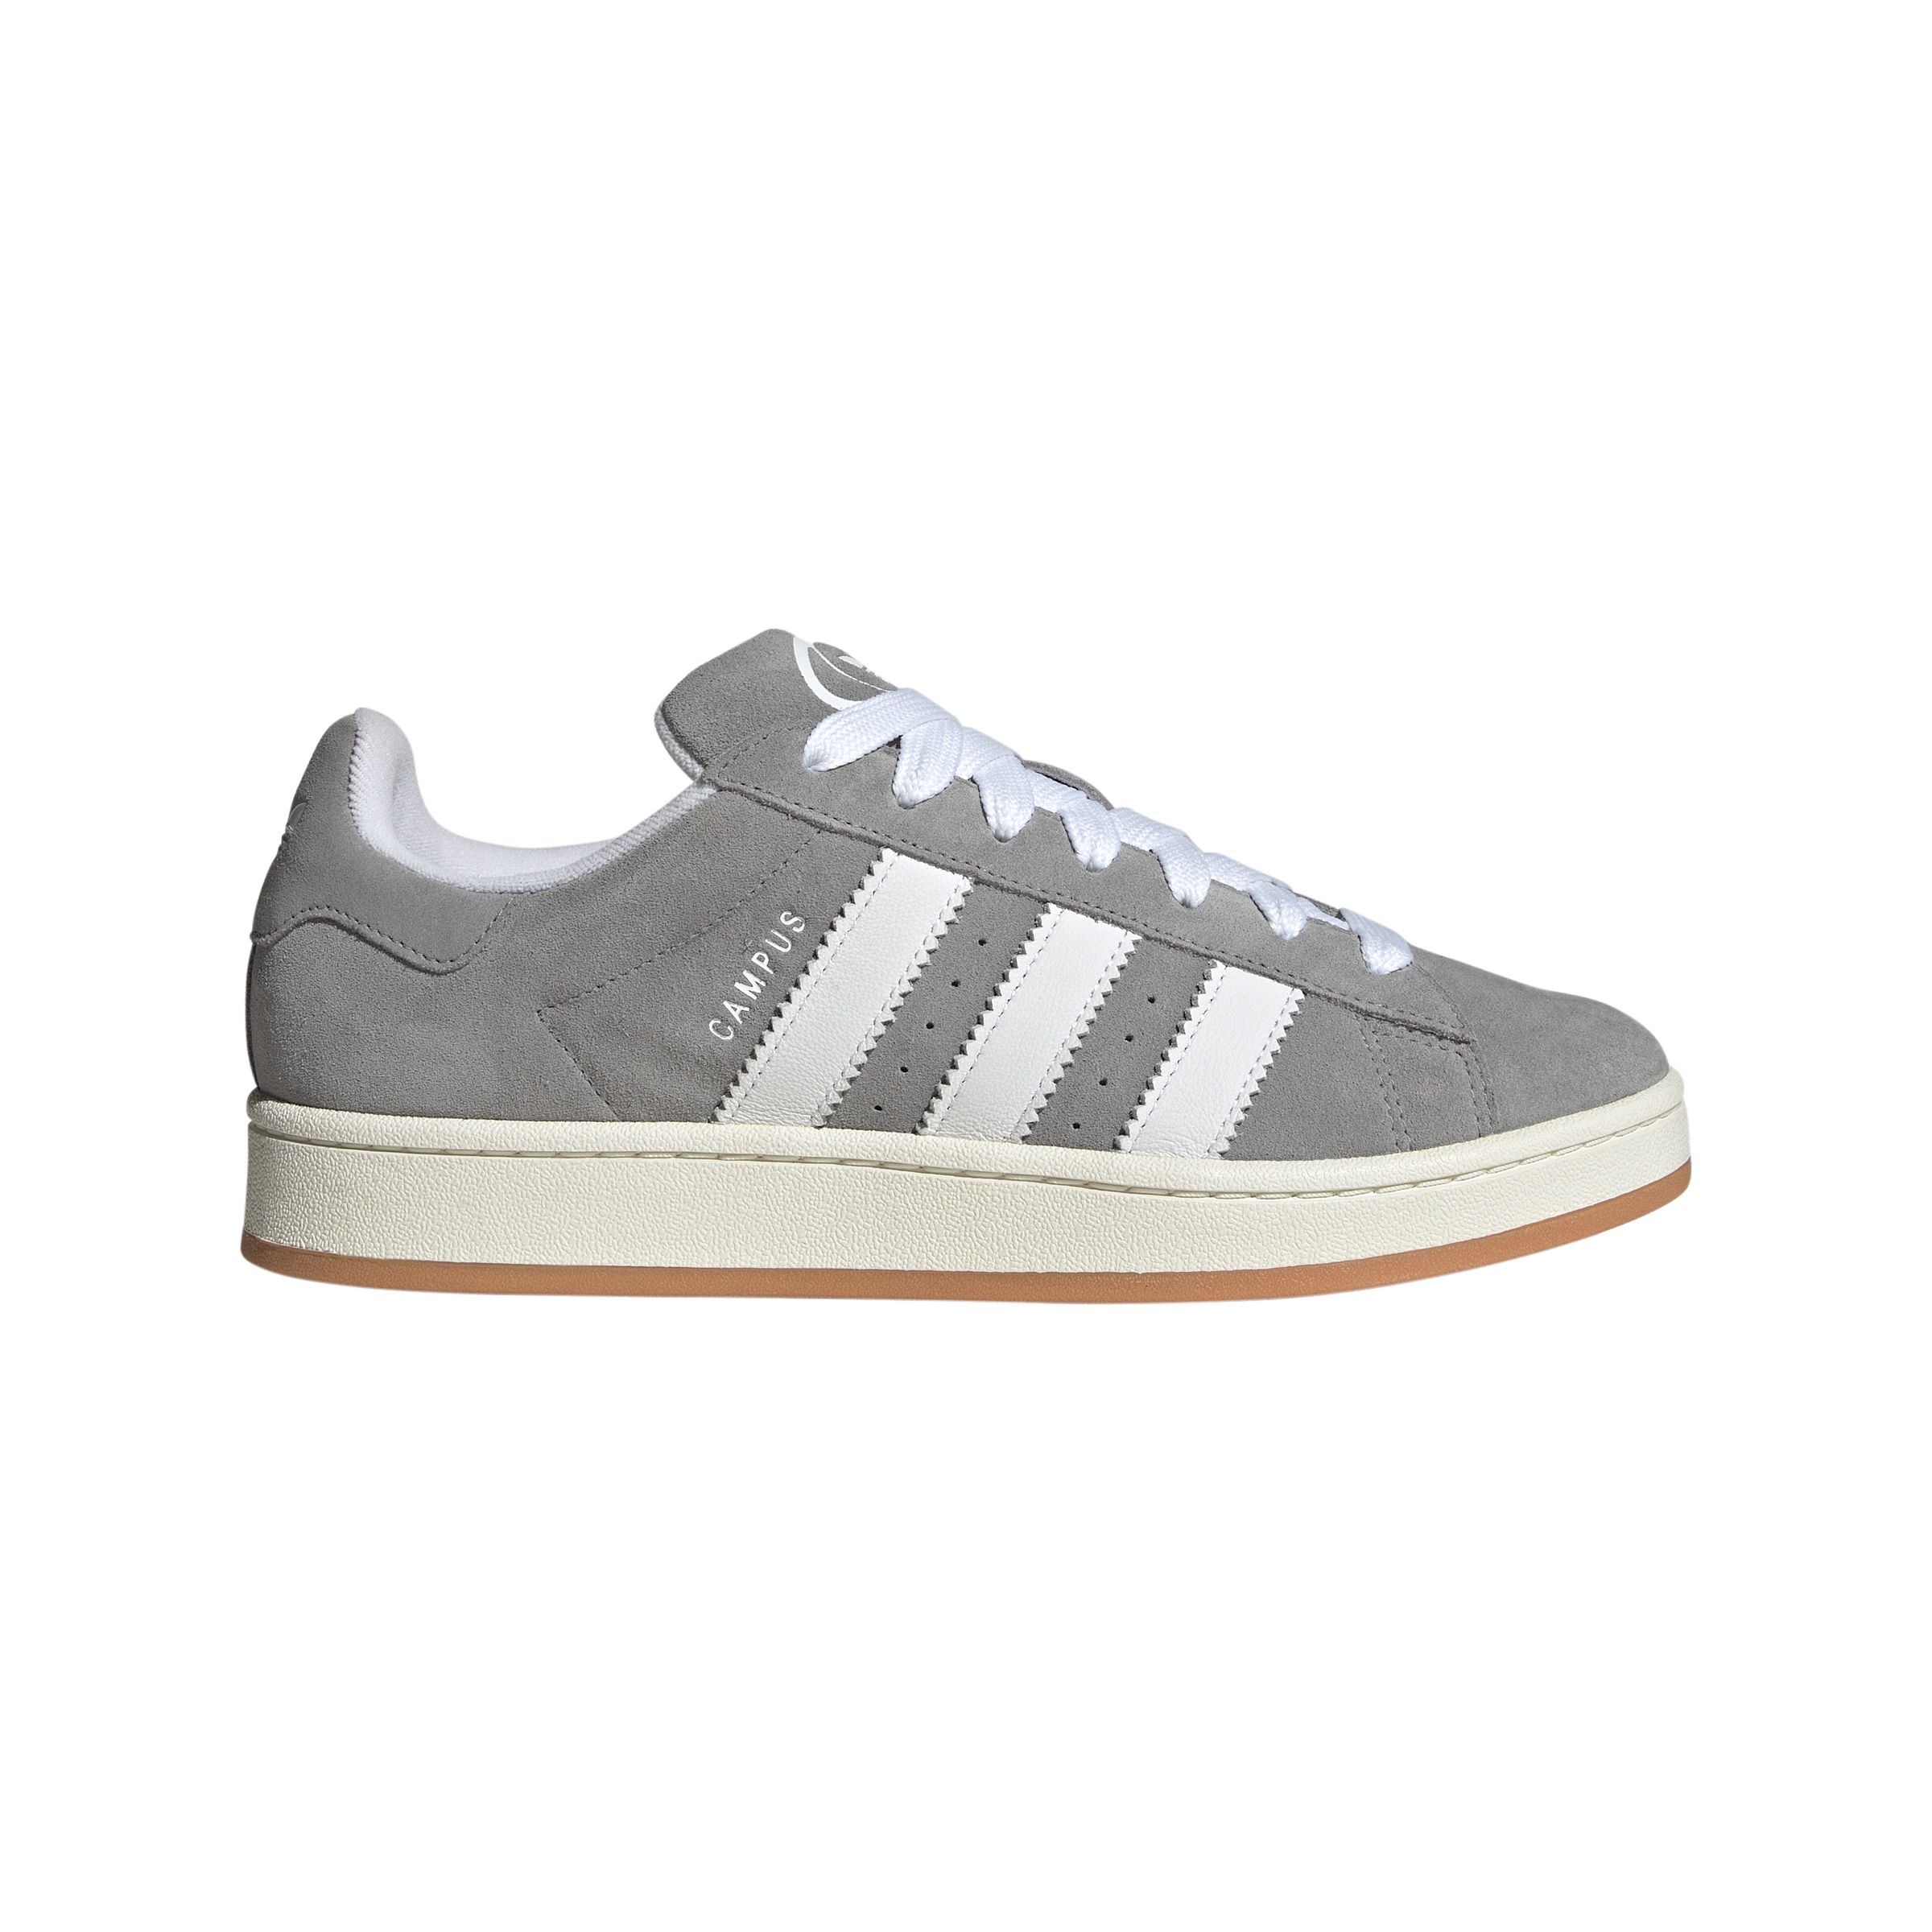 Image of adidas Men's Campus Shoes